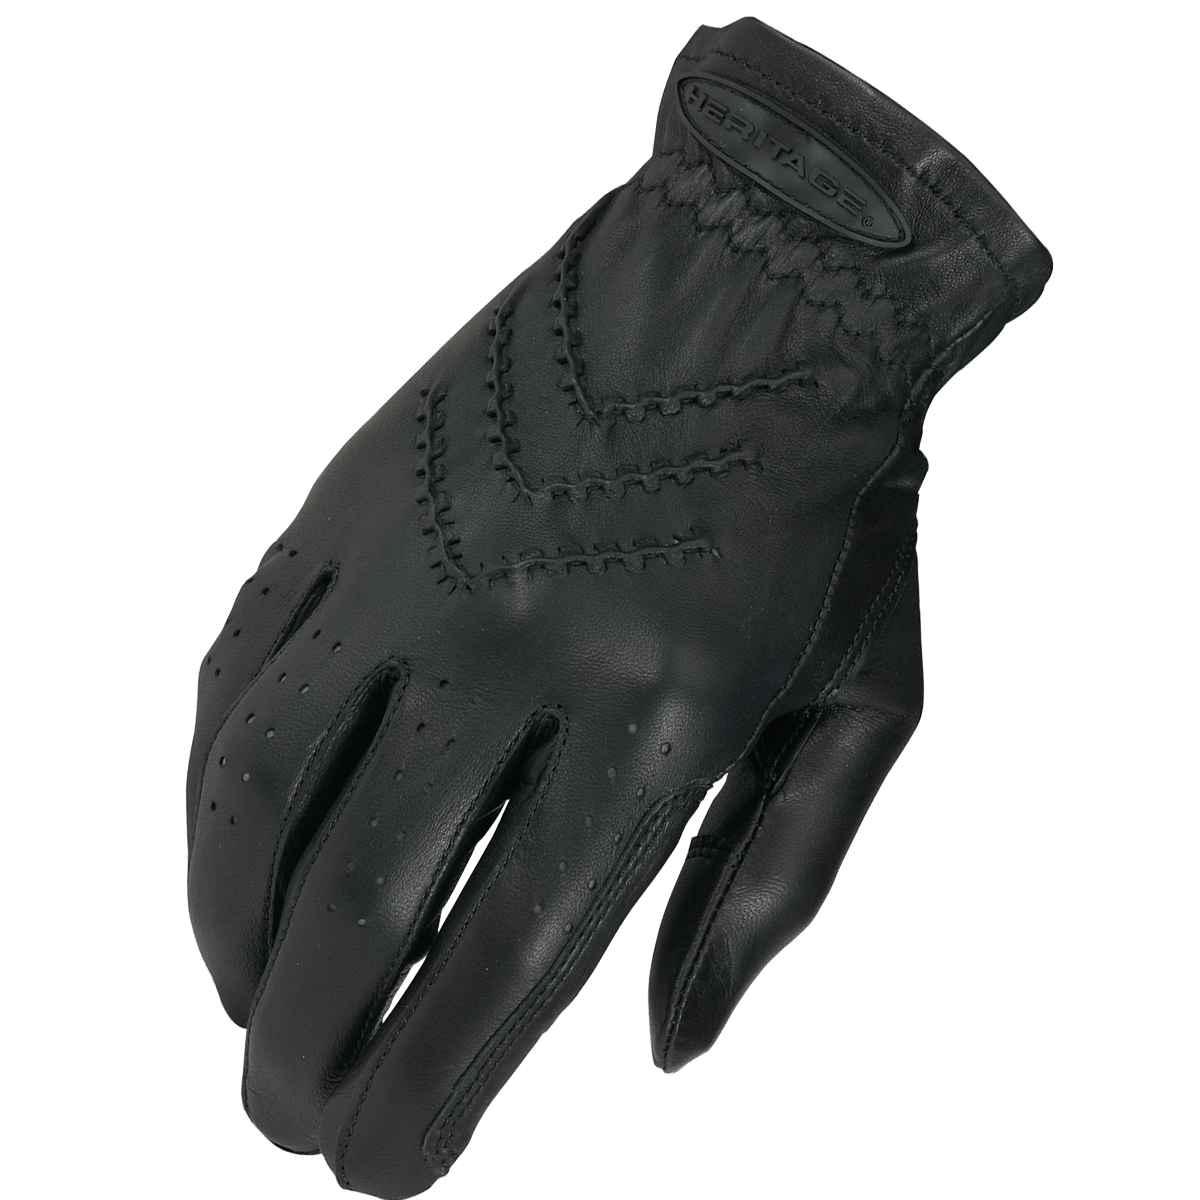 Heritage Crochet Back Riding Gloves Lightweight All Sizes BLACK or NATURAL 